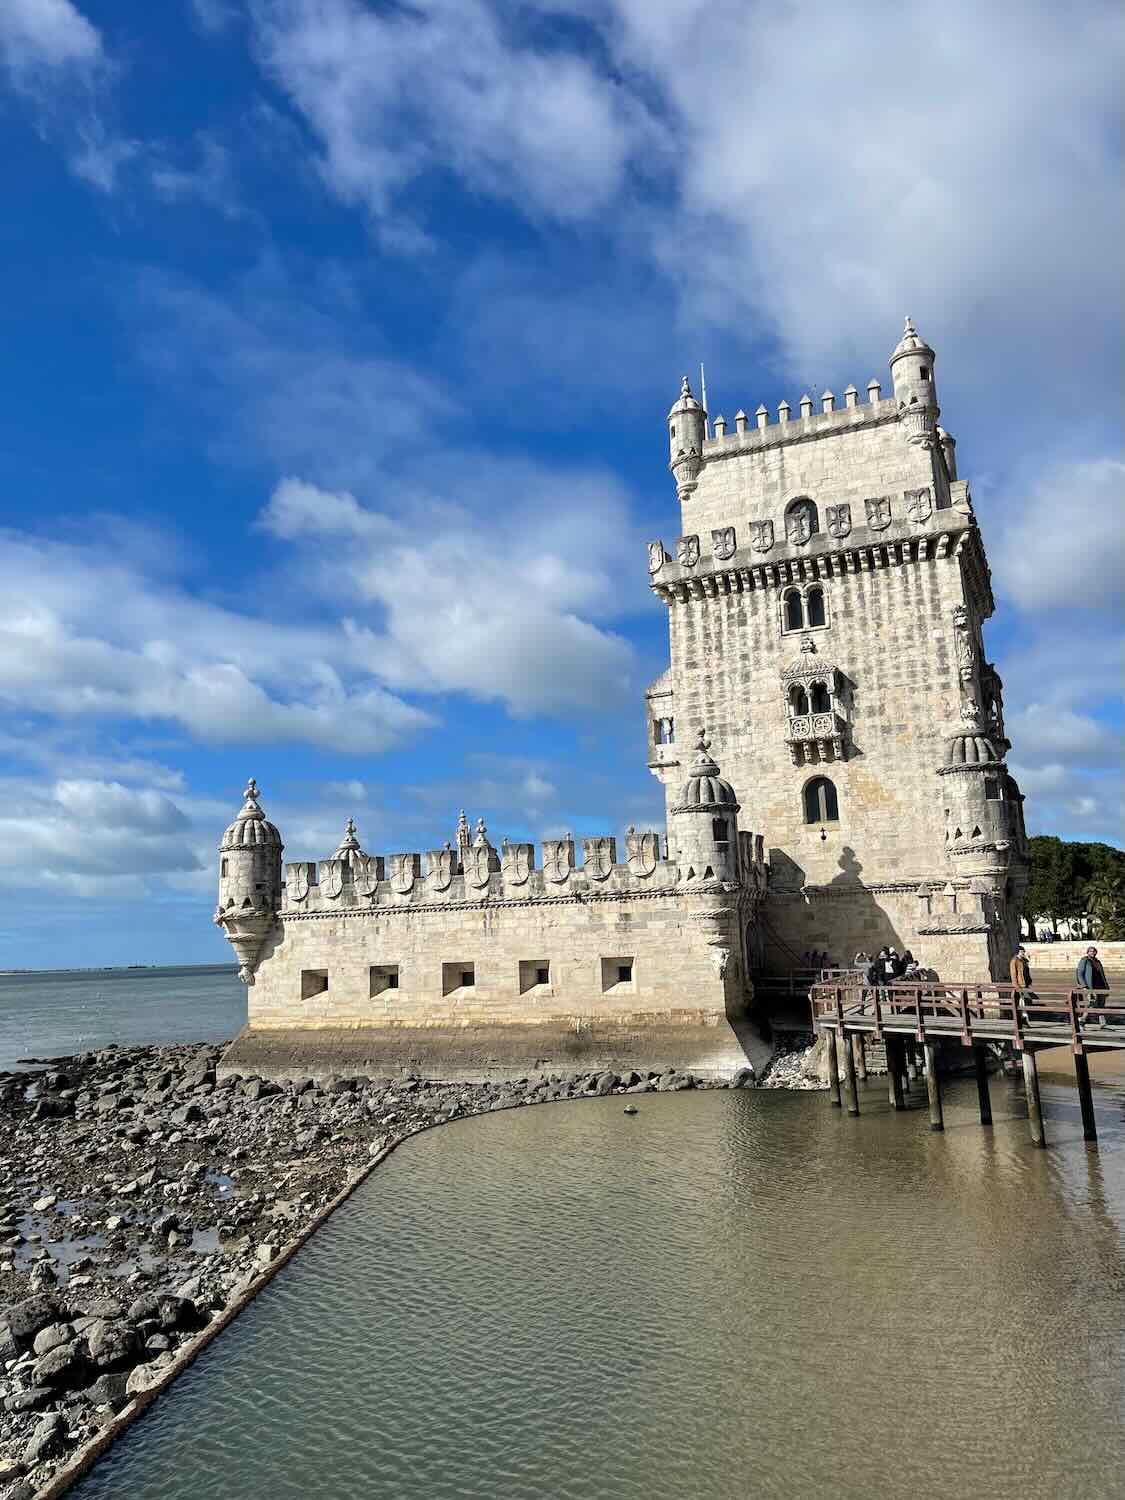 Belem Tower standing majestically beside the Tagus River under a partly cloudy sky, with a wooden footbridge leading to the entrance.